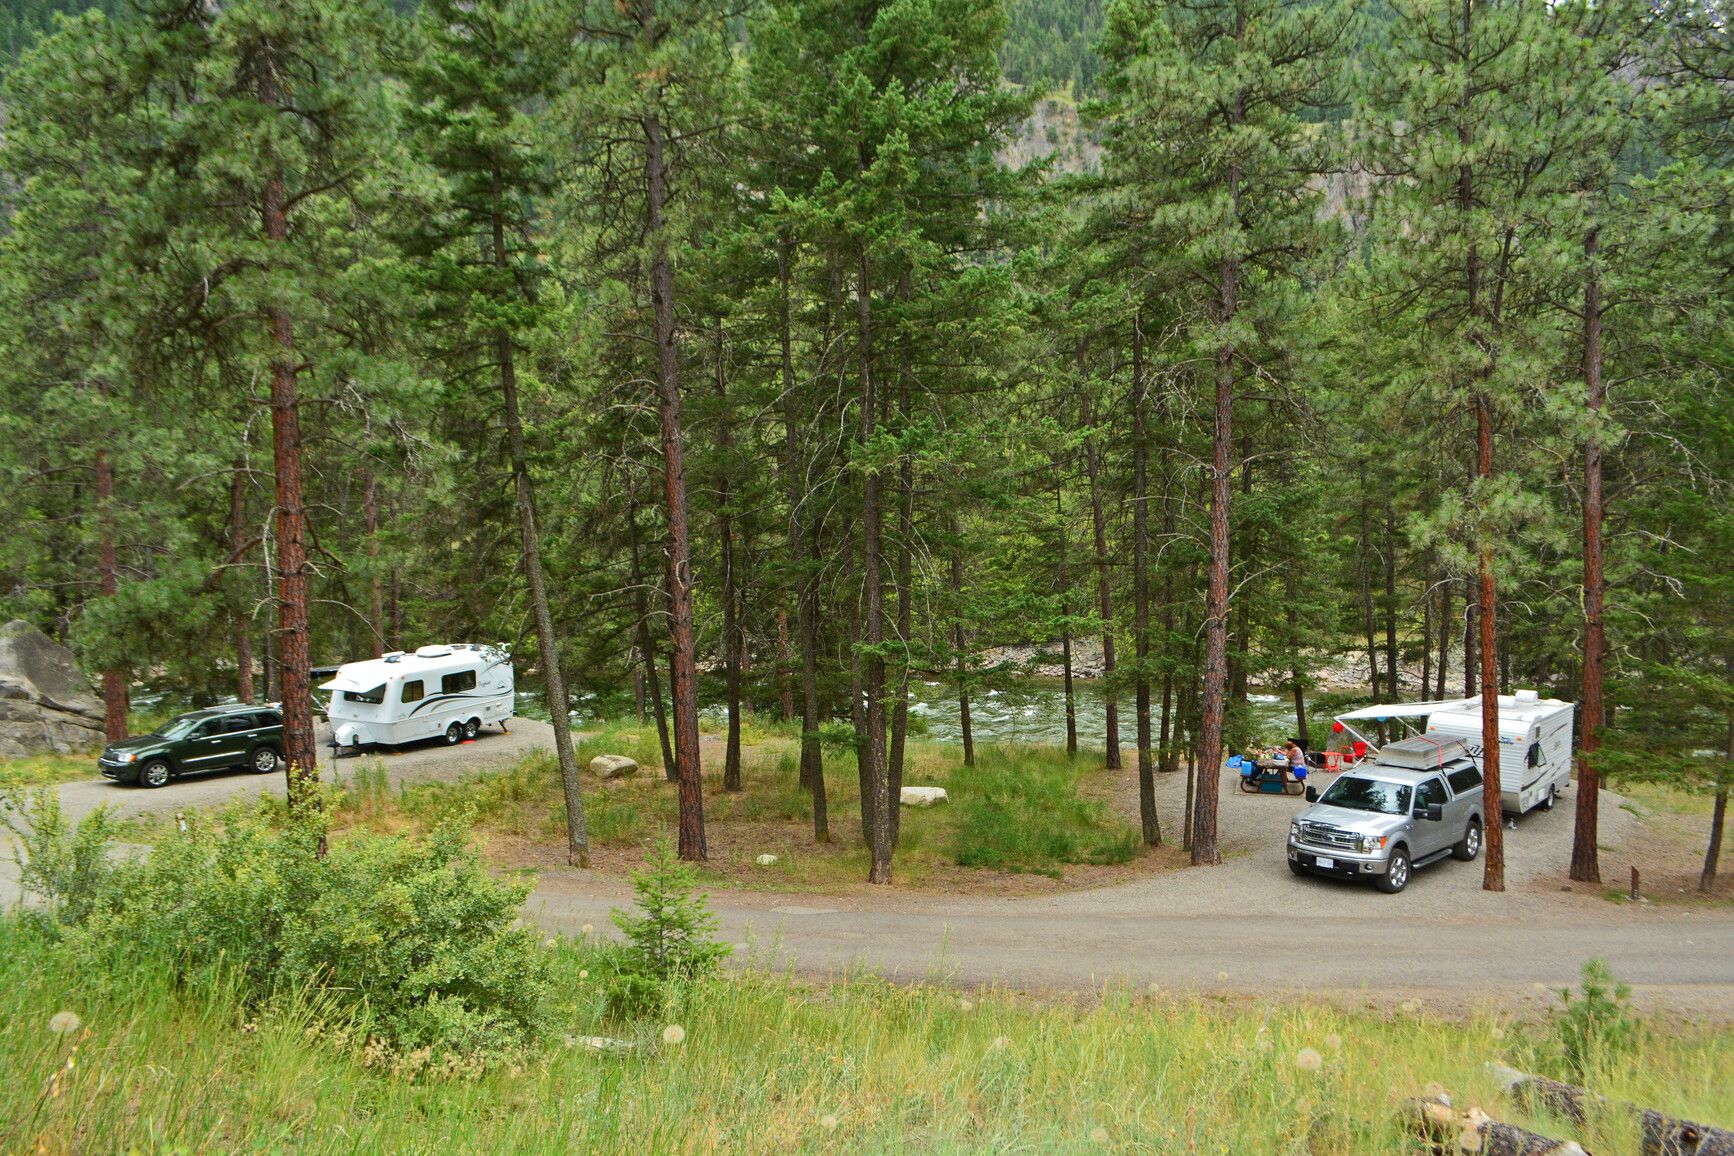 At Stemwinder Park, you'll find large, level campsites spaced generously along the picturesque Similkameen River.